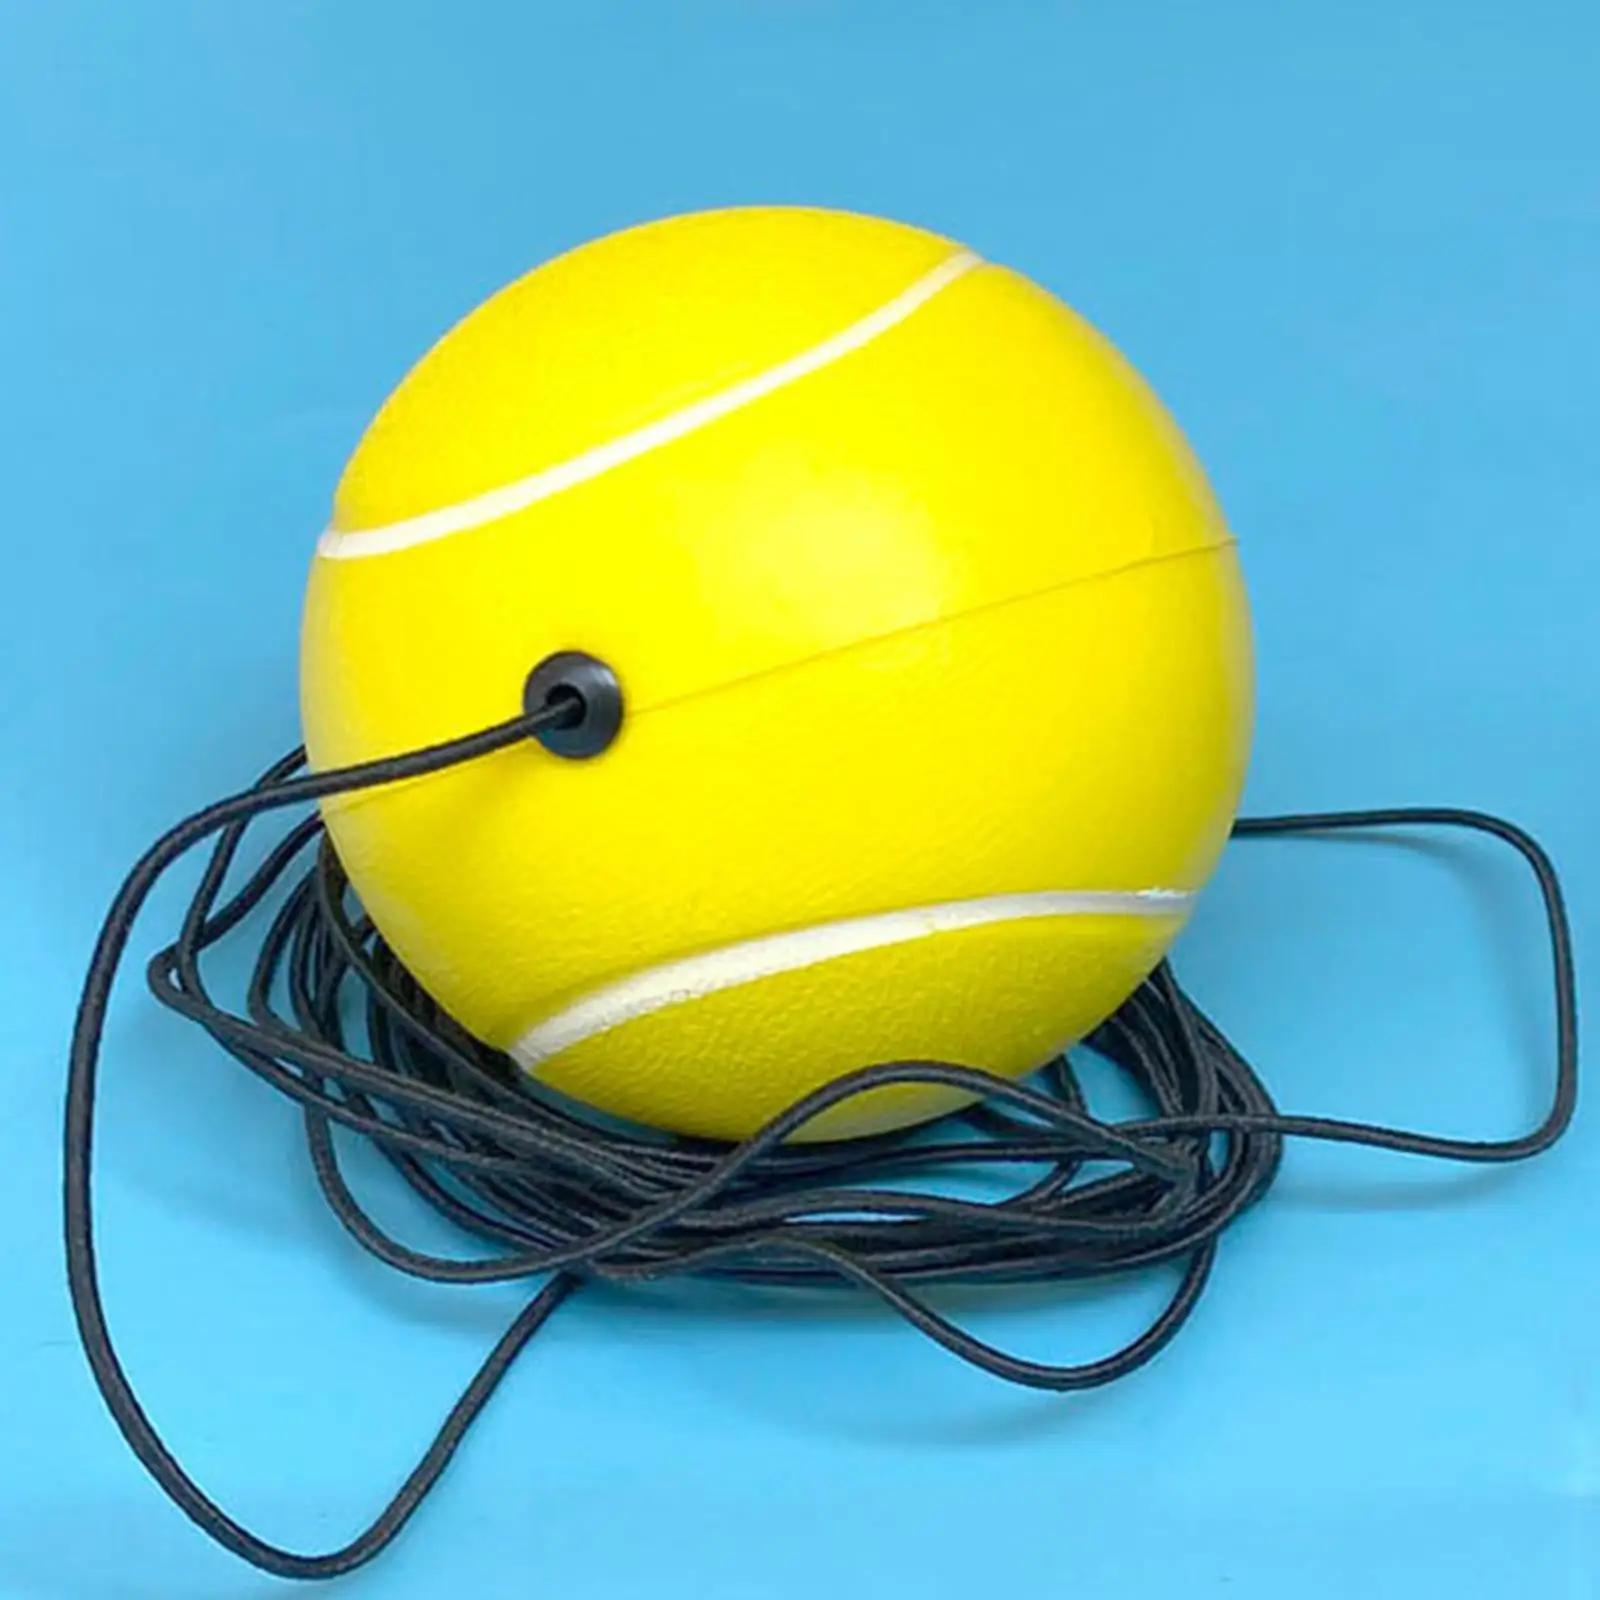 Tennis  with String Training Ball for Indoor Outdoor Practice